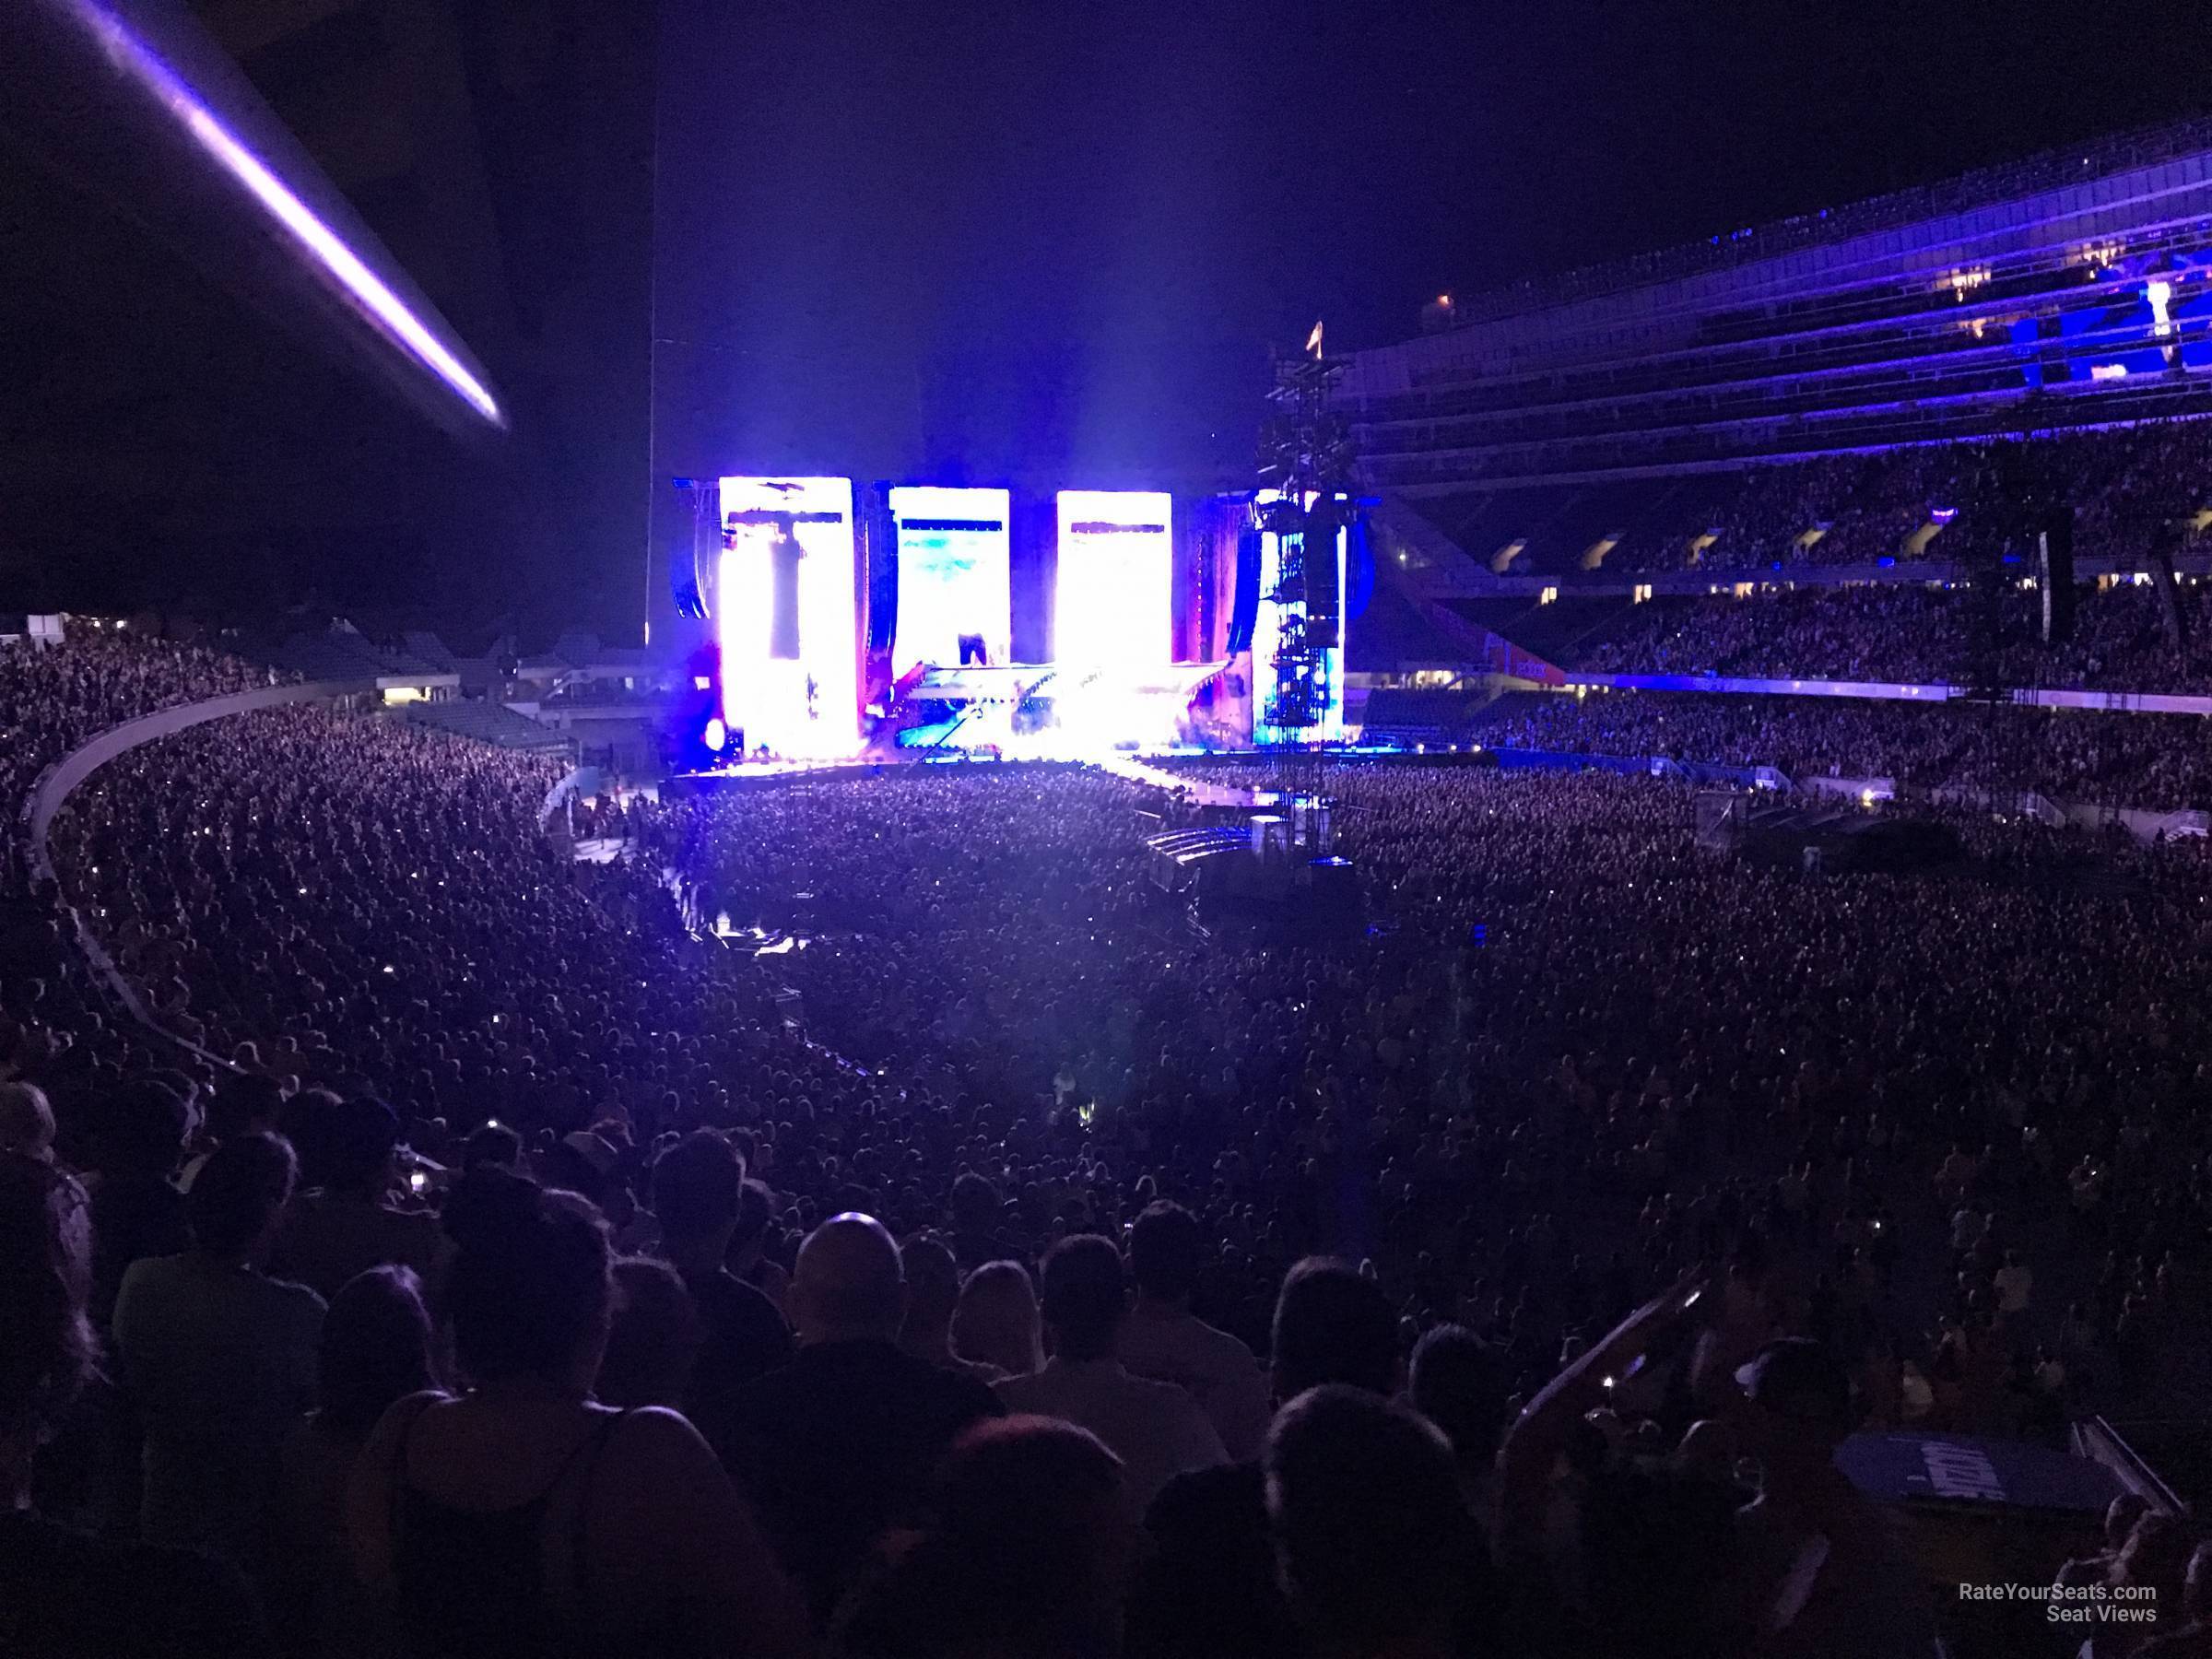 section 228, row 4 seat view  for concert - soldier field